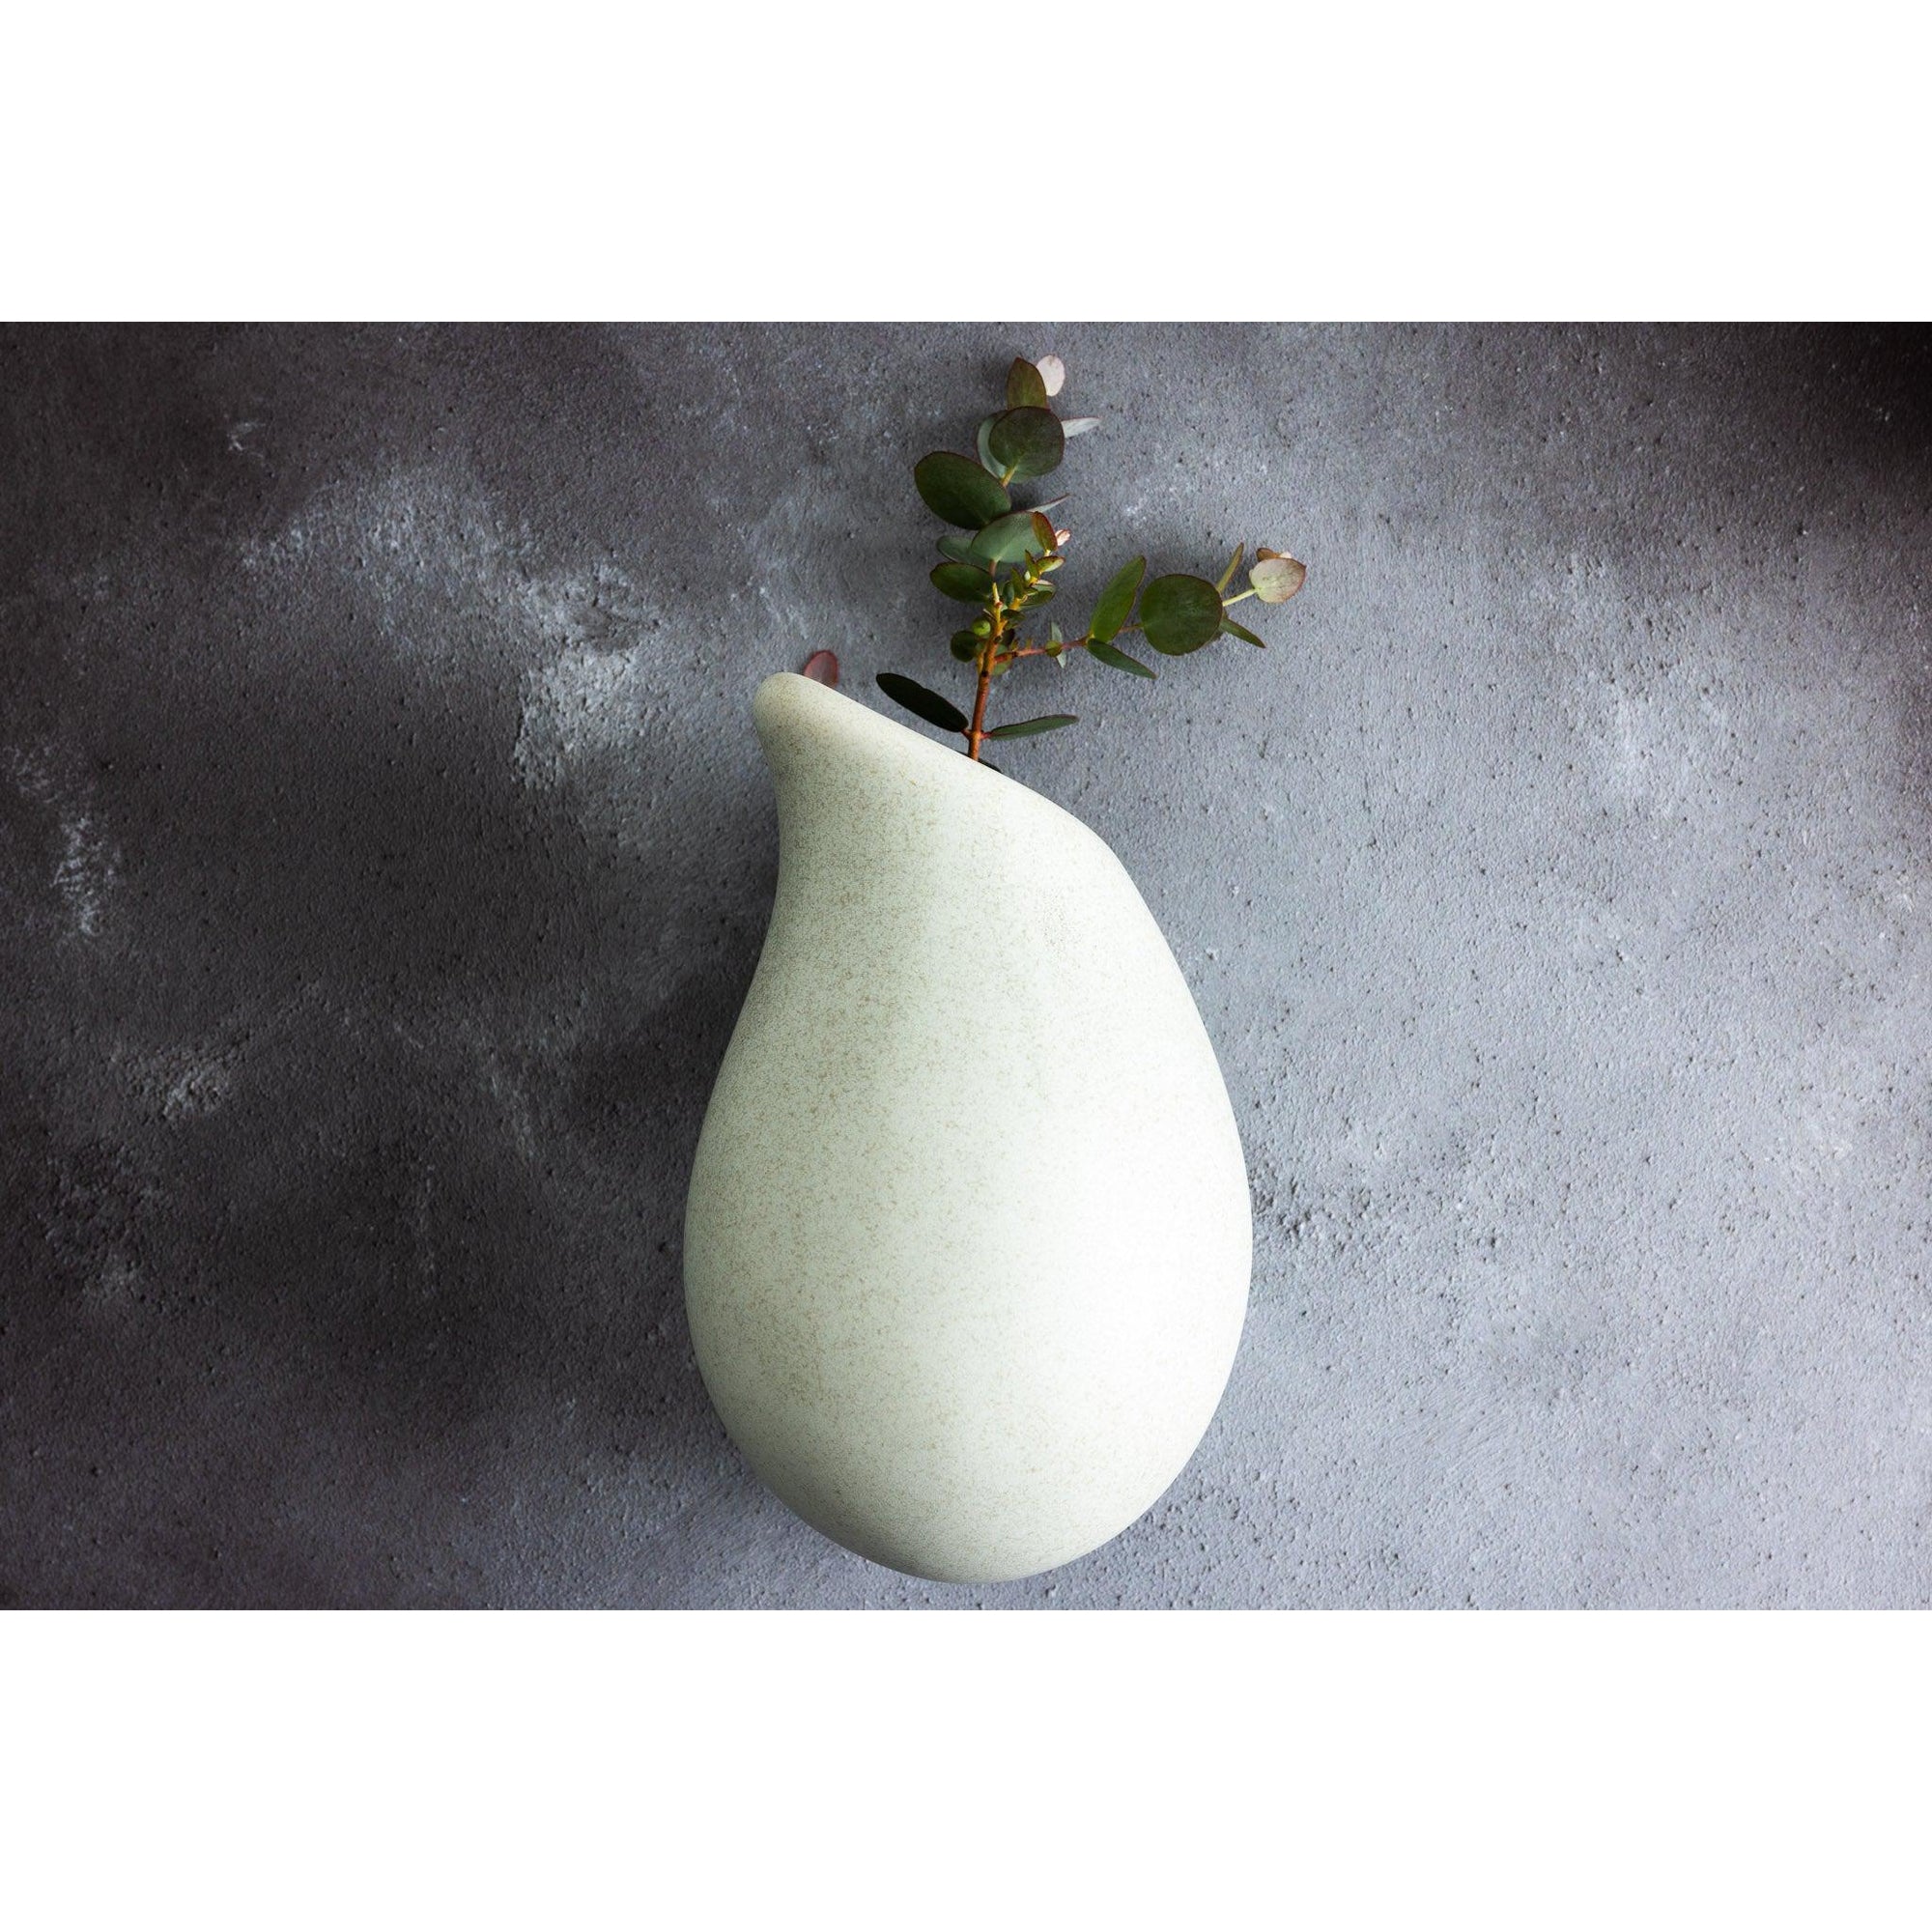 KSR5 Droplet Wall Vase by Kate Schuricht, available at Padstow Gallery, Cornwall